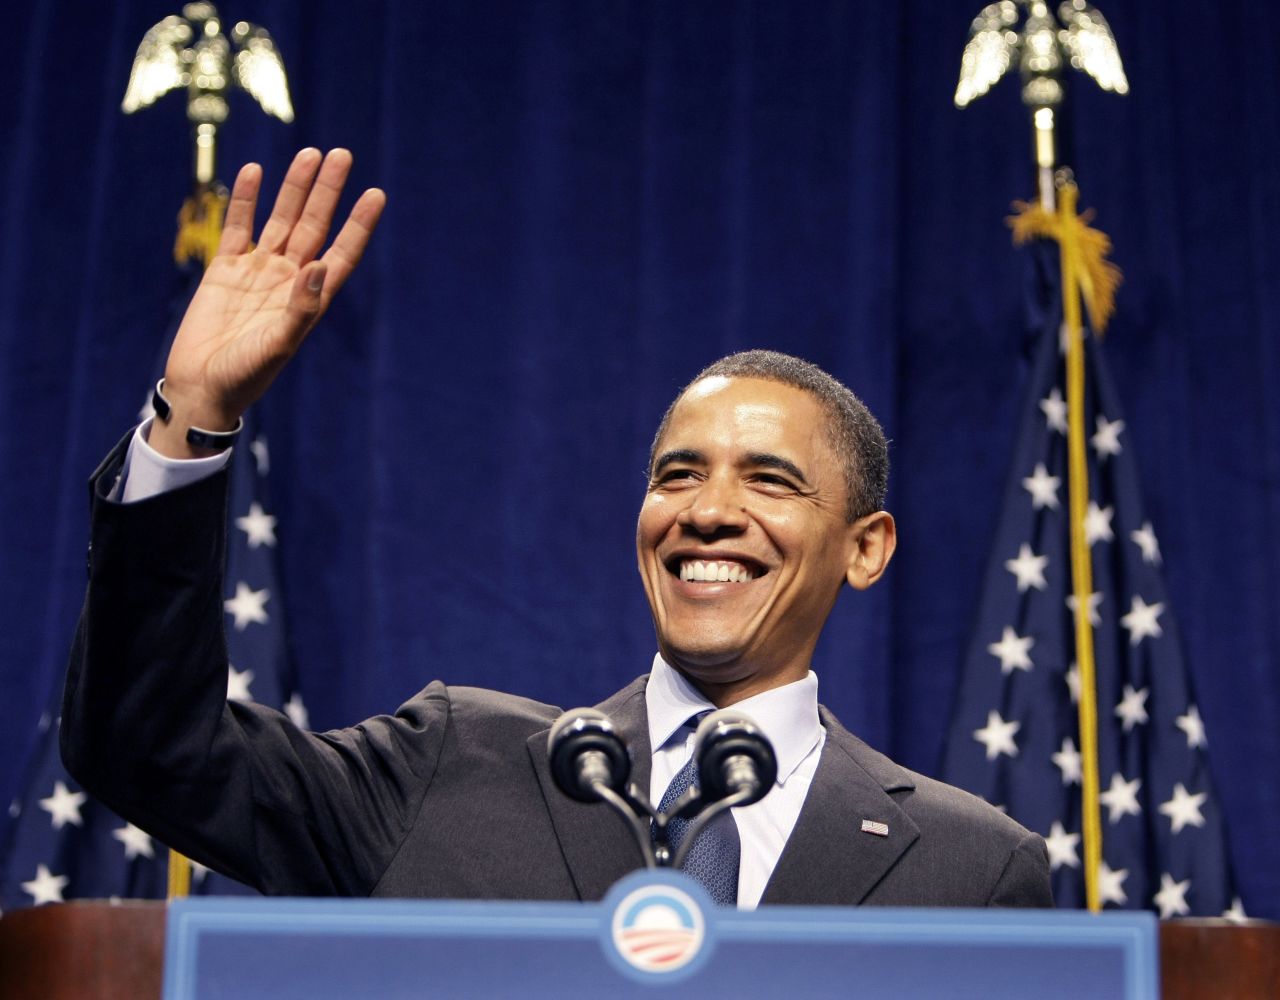 Democratic presidential candidate Barack Obama smiles and waves as the crowd sings "Happy Birthday" to him before his speech at the Lansing Center in Lansing, Michigan, on August 4, 2008.